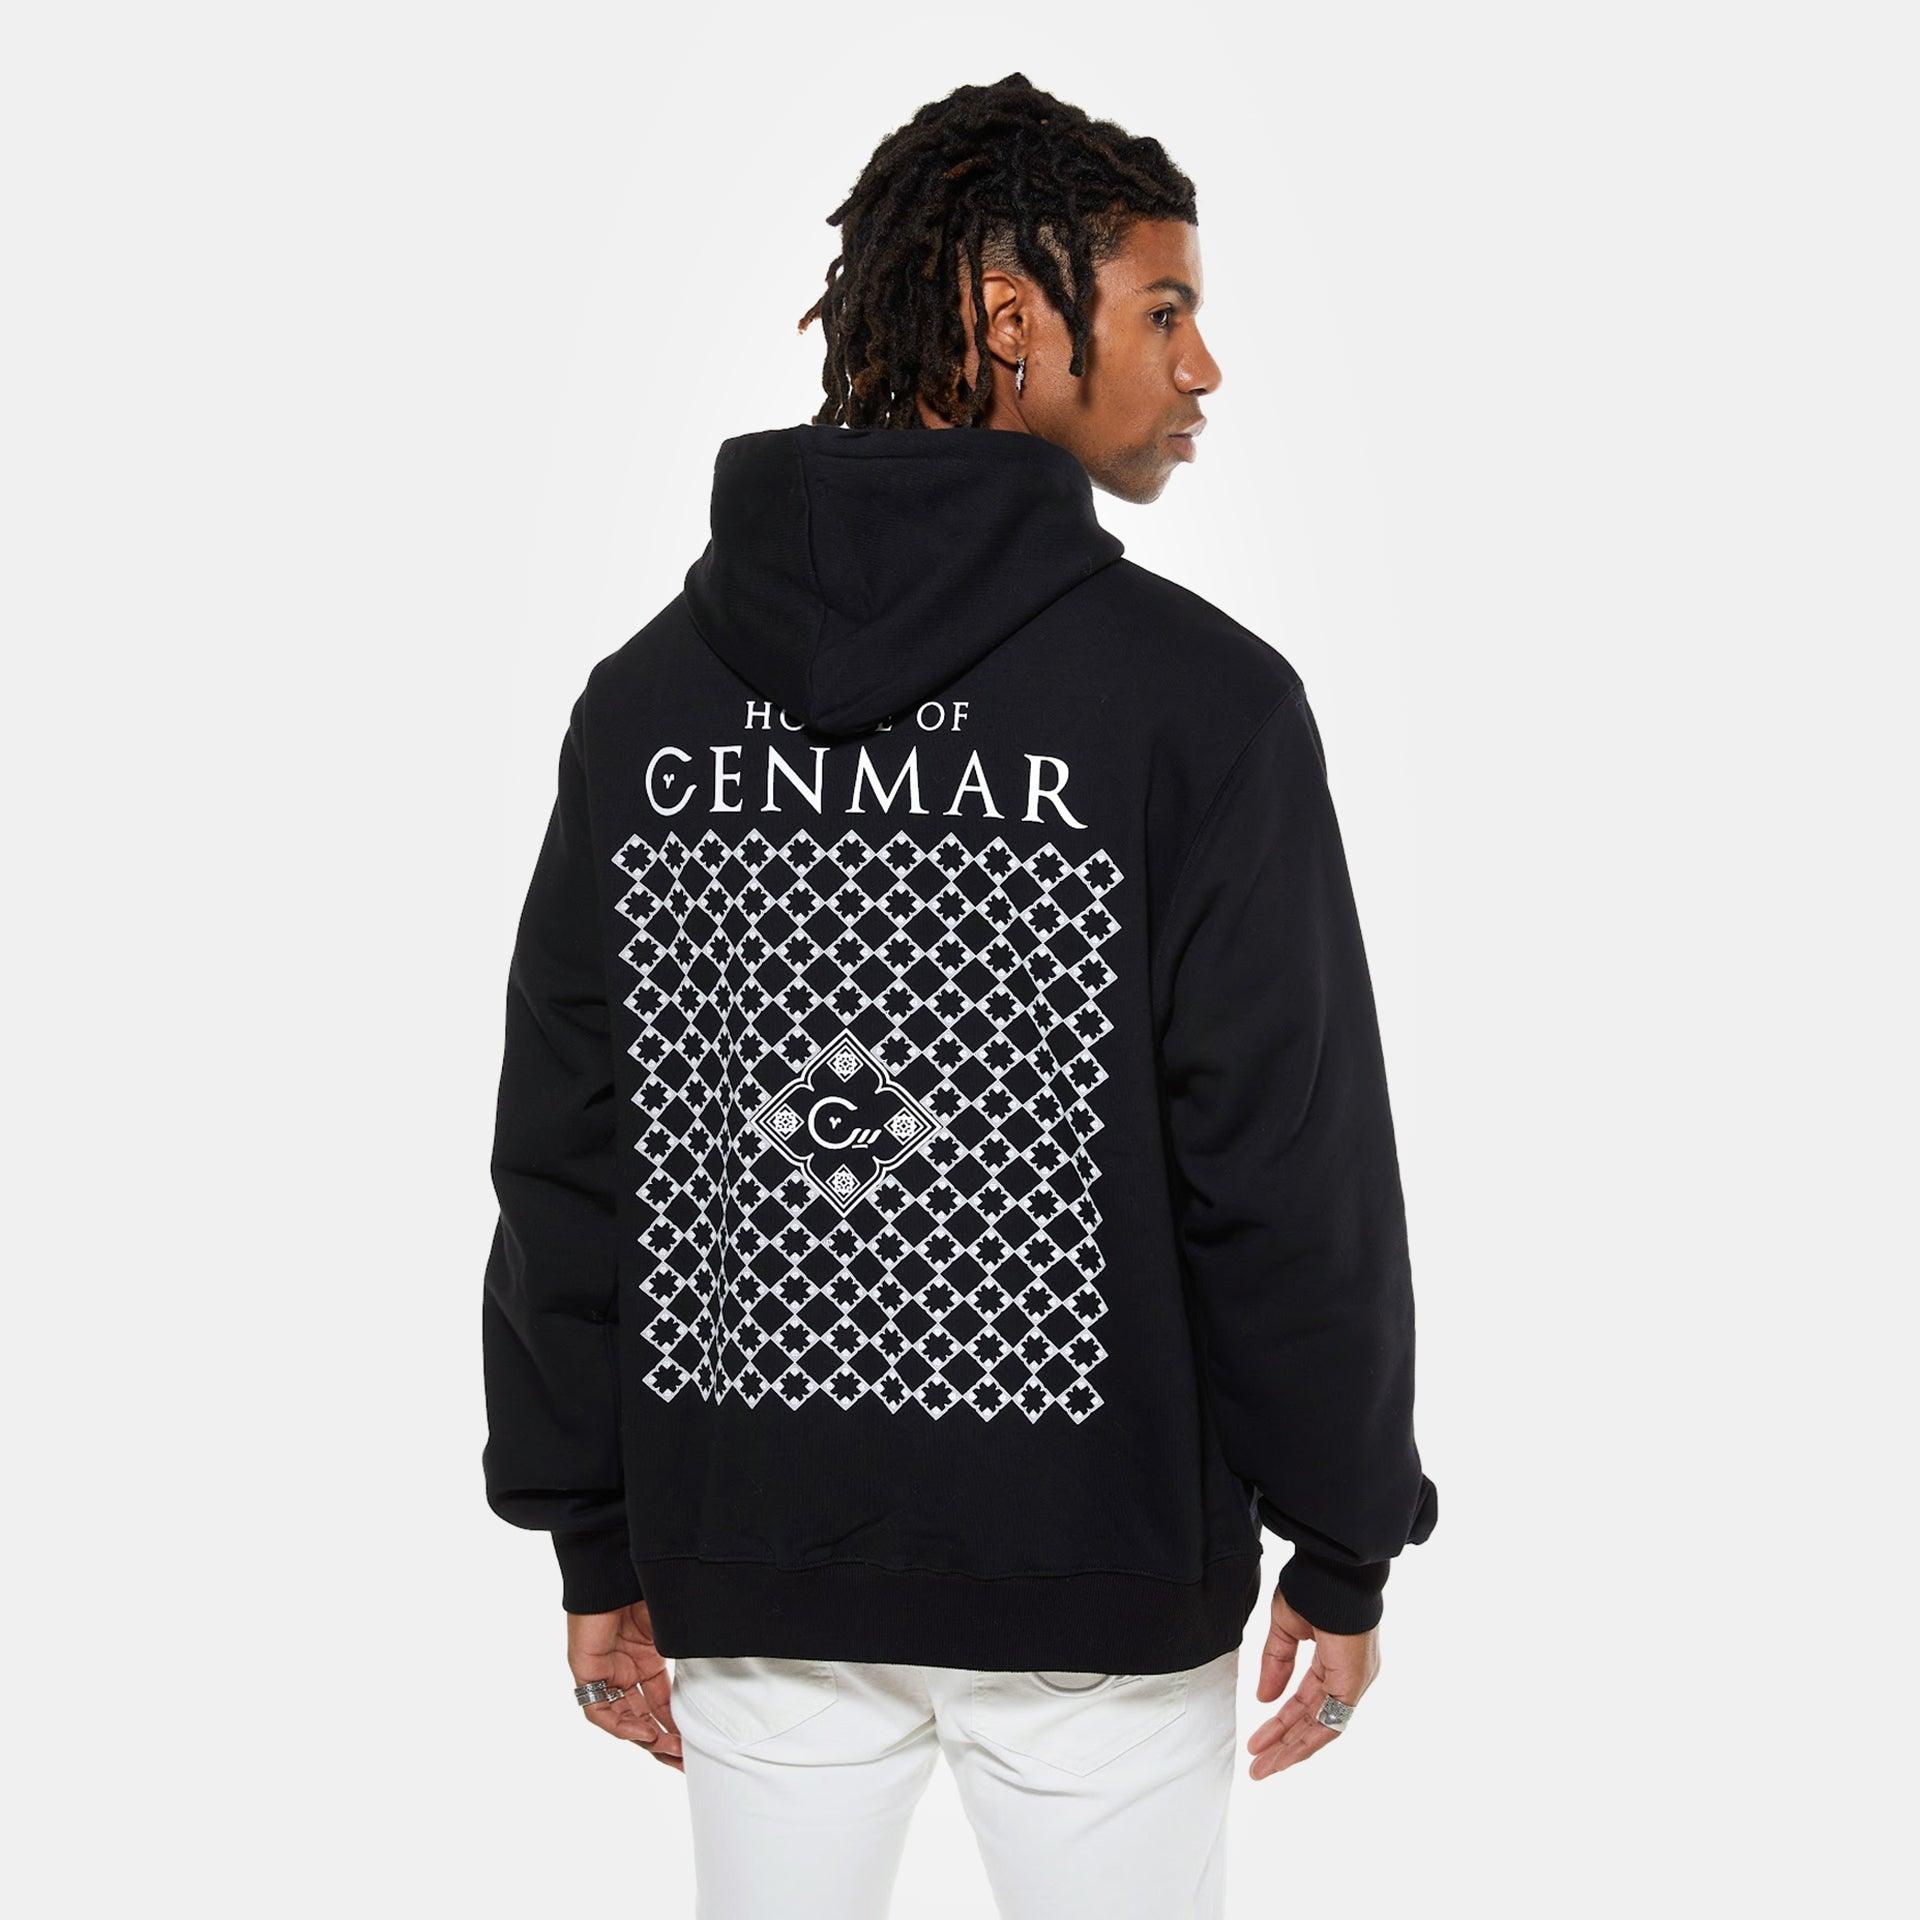 BLACK HOODIE WITH PRINT BACK FROM HOUSE OF CENMAR - WECRE8